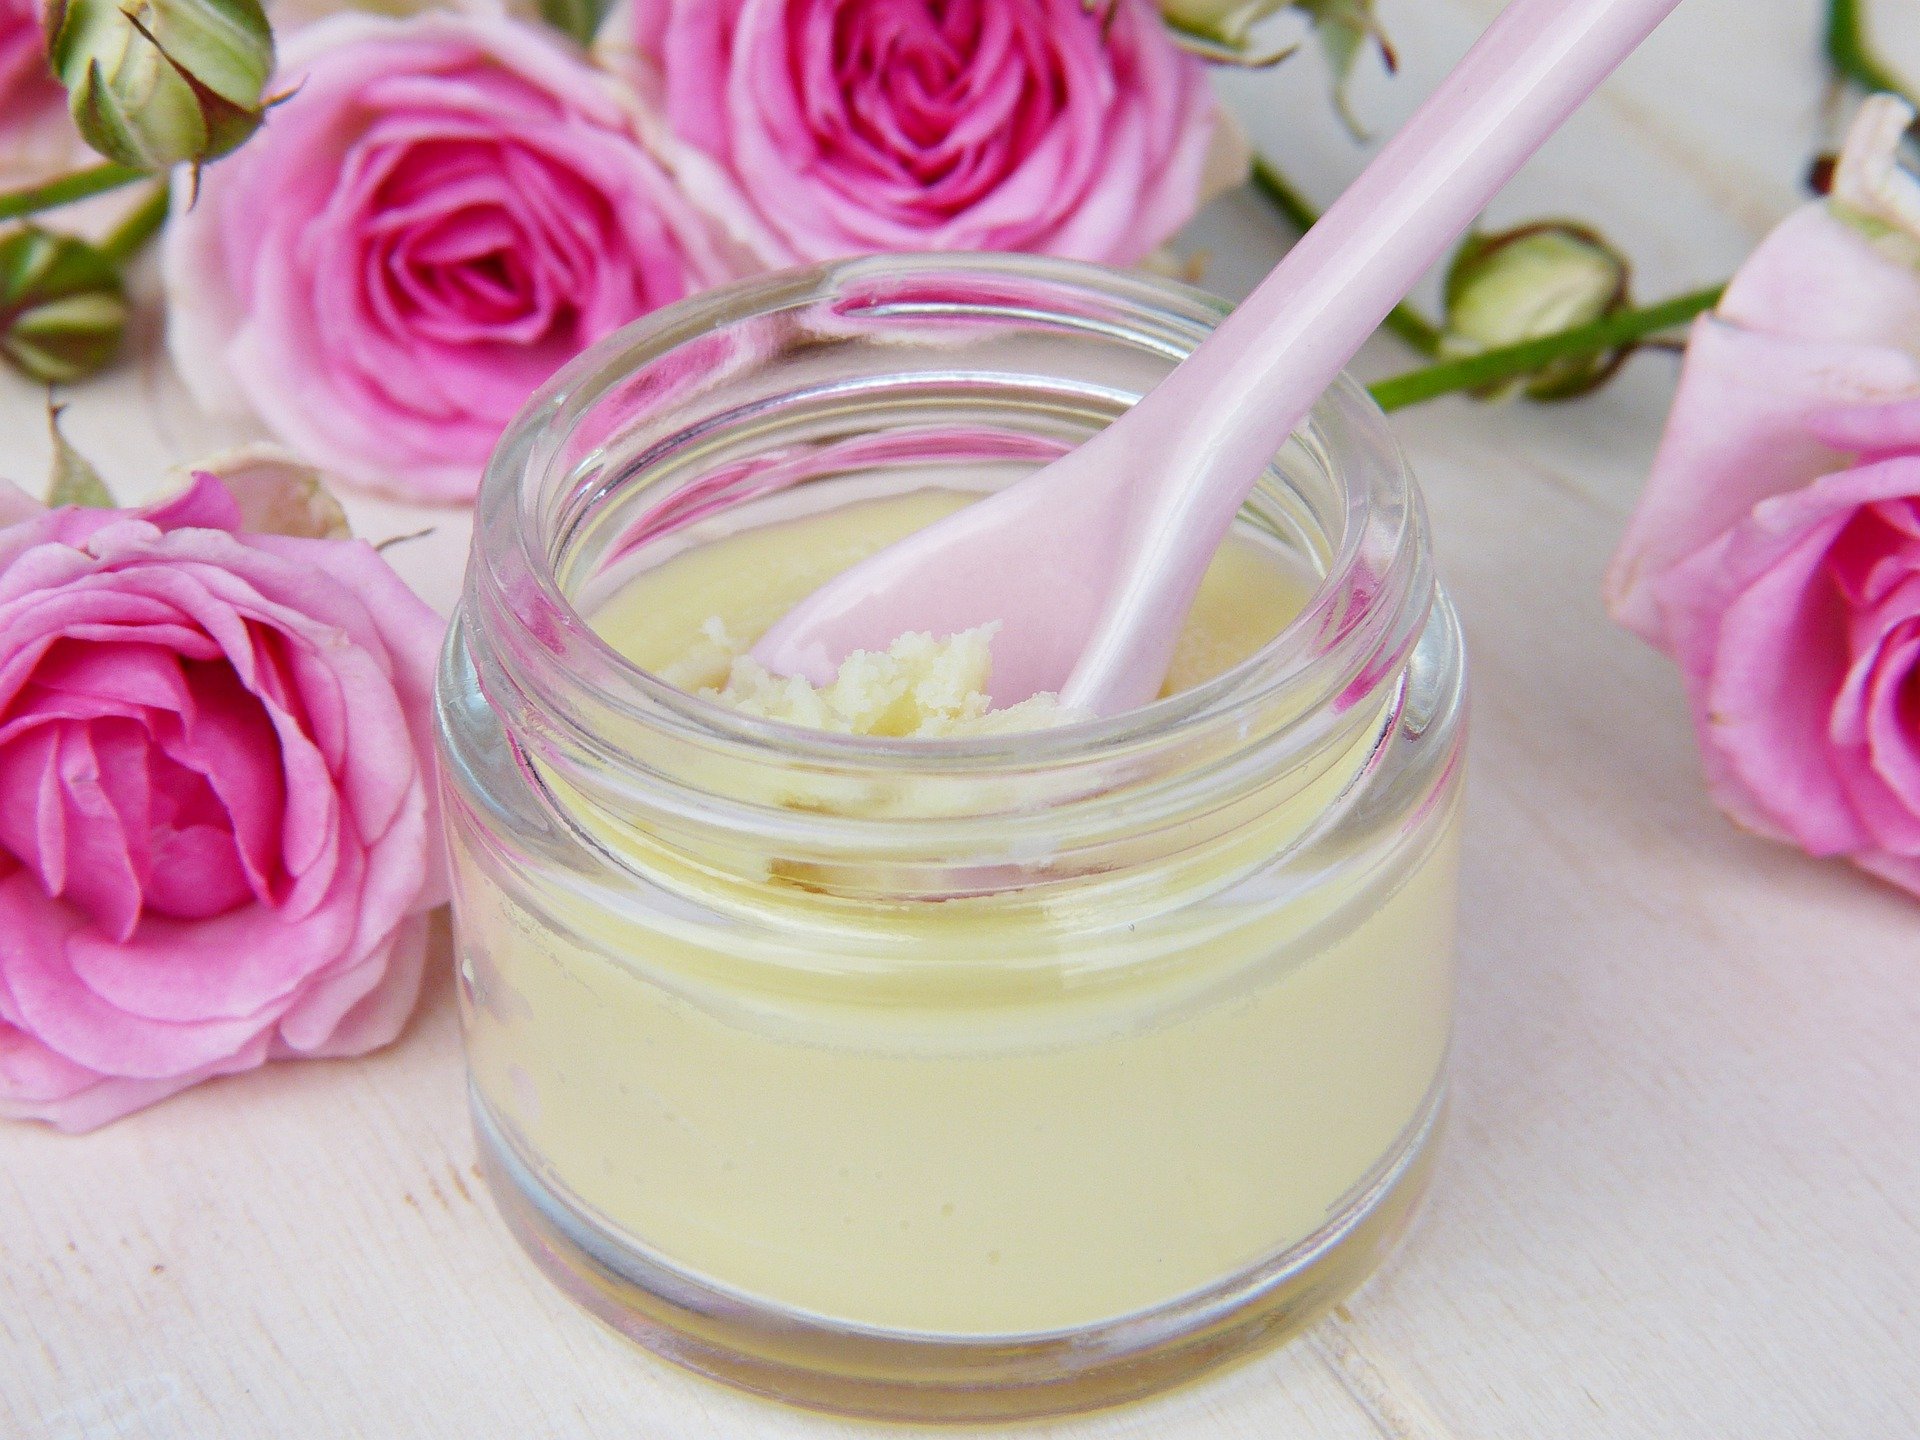 Ranking of the best creams for problem skin for 2022